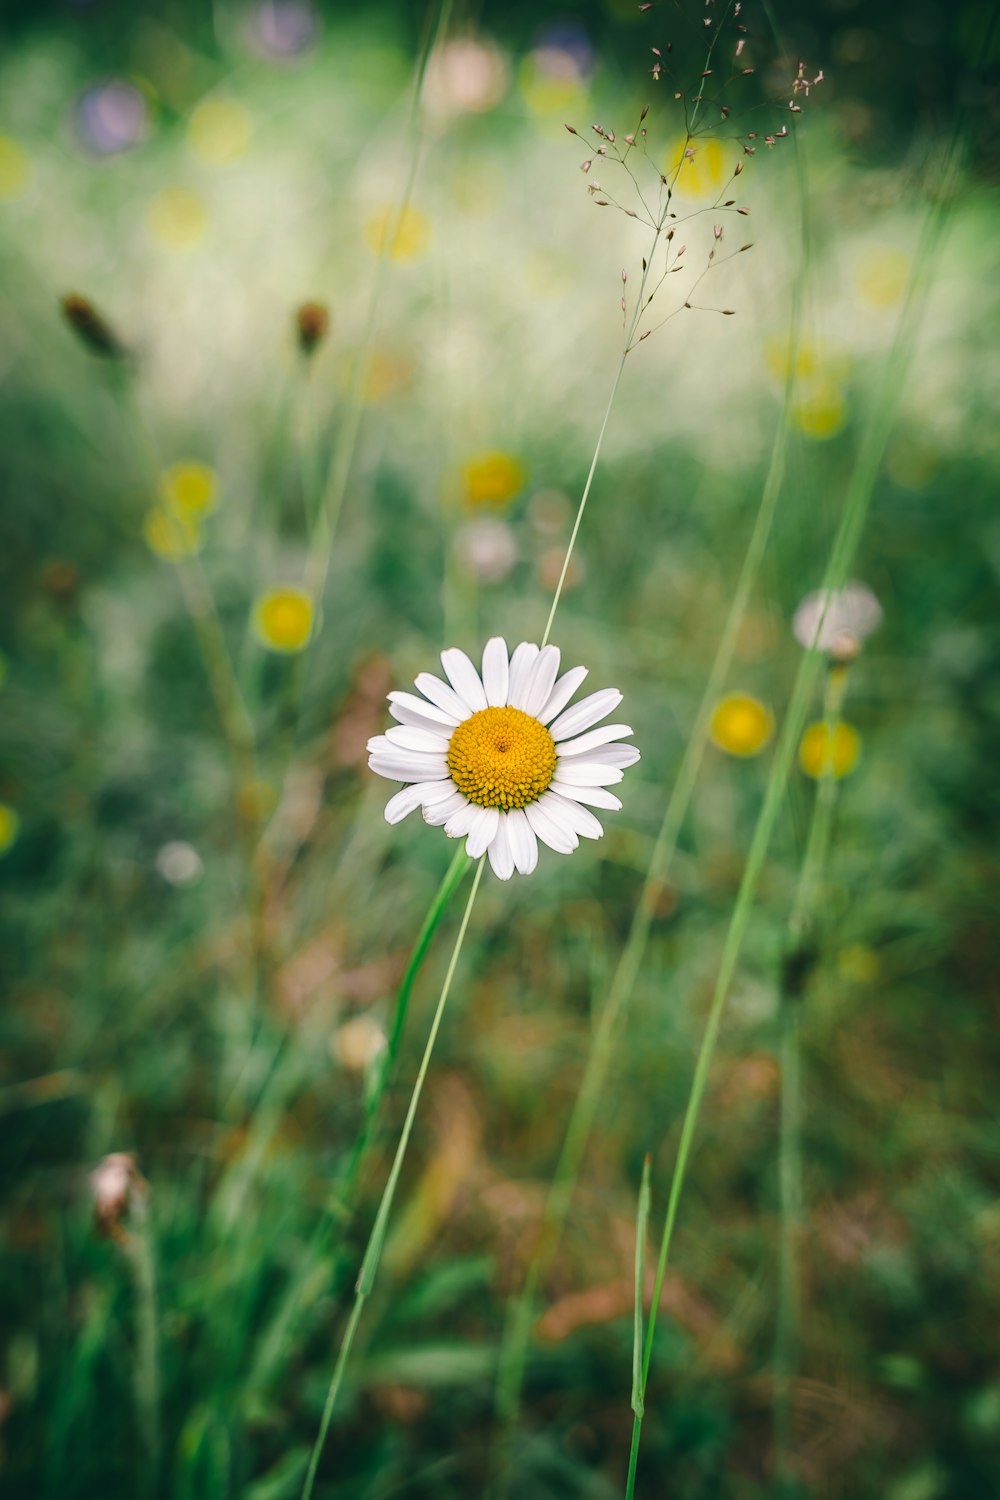 a white flower with a yellow center in a field of grass